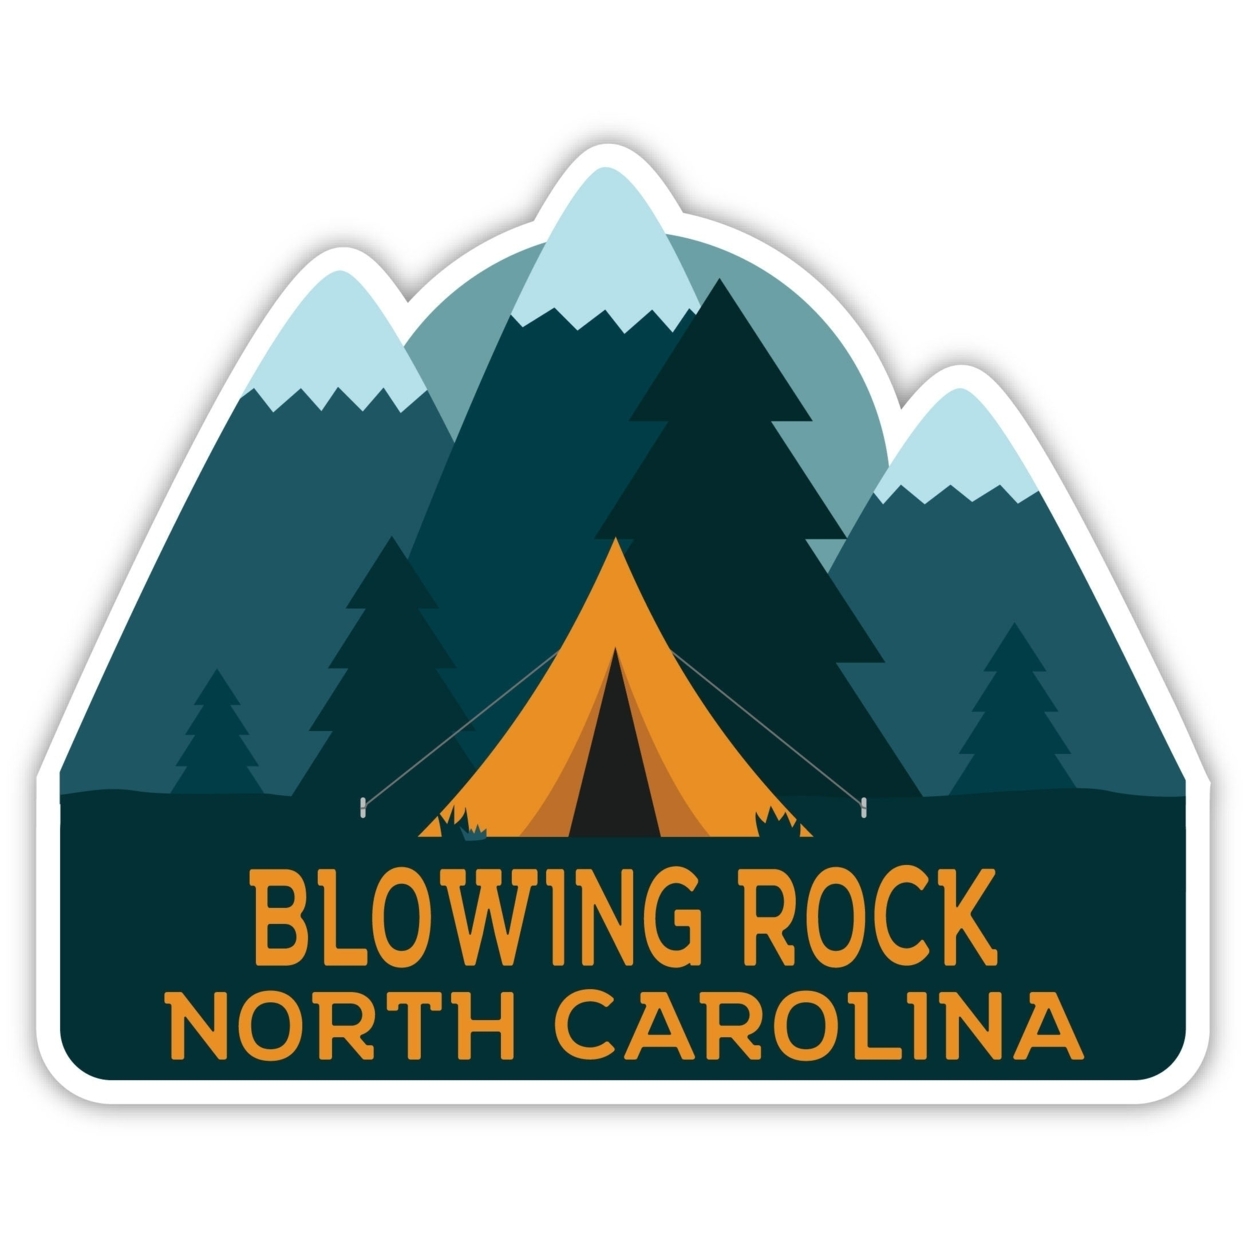 Blowing Rock North Carolina Souvenir Decorative Stickers (Choose Theme And Size) - 4-Pack, 4-Inch, Adventures Awaits